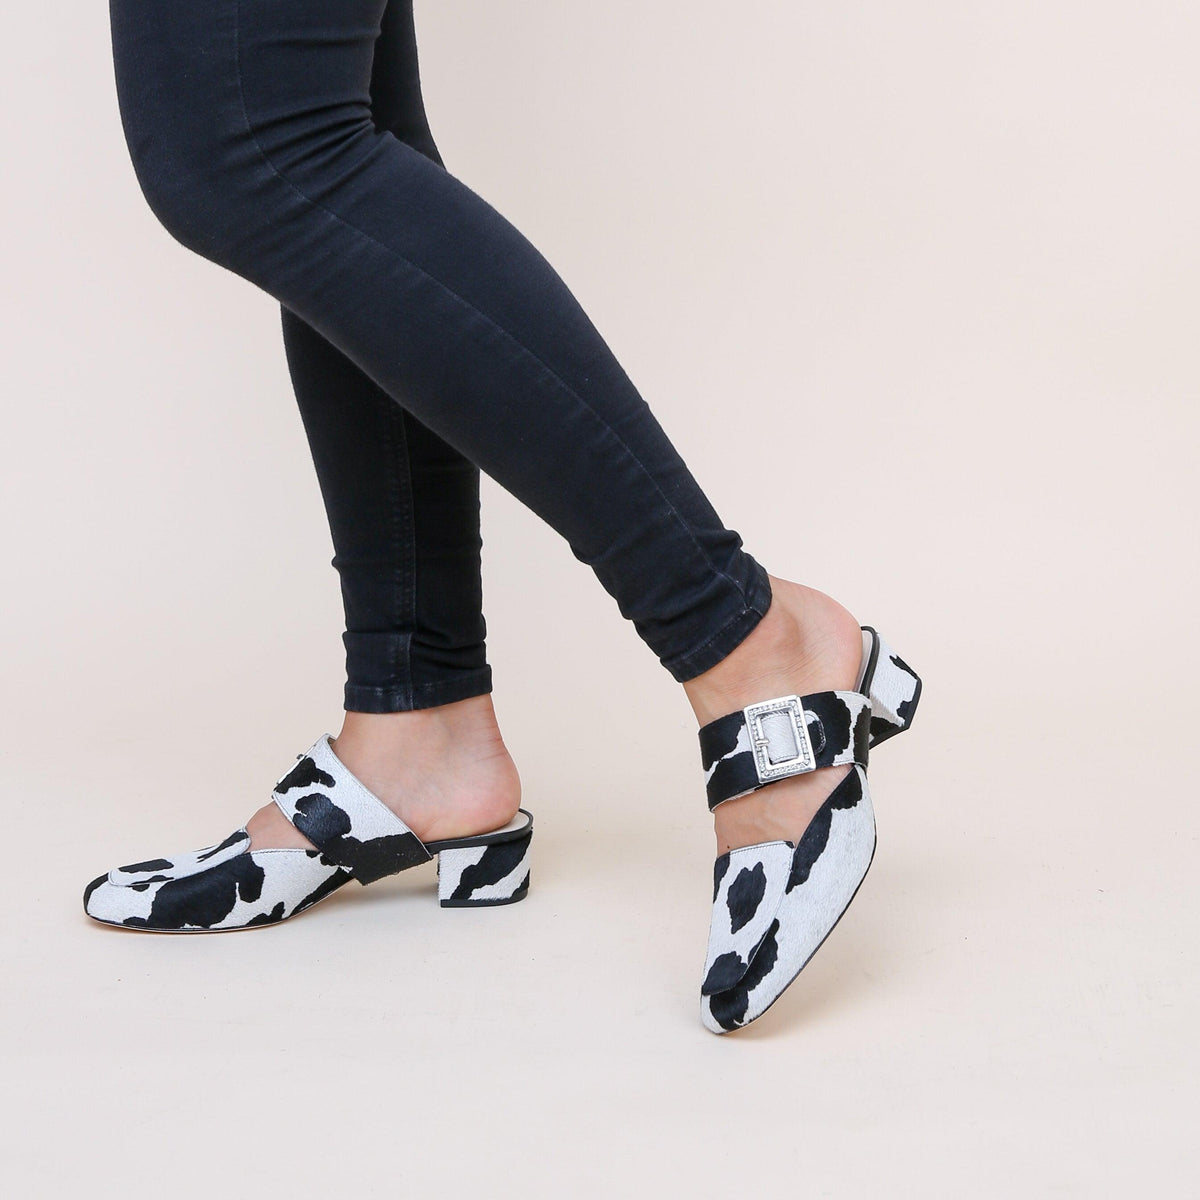 Grace in Cow Print Custom Shoe Straps | Alterre Make A Shoe - Sustainable Shoes & Ethical Footwear